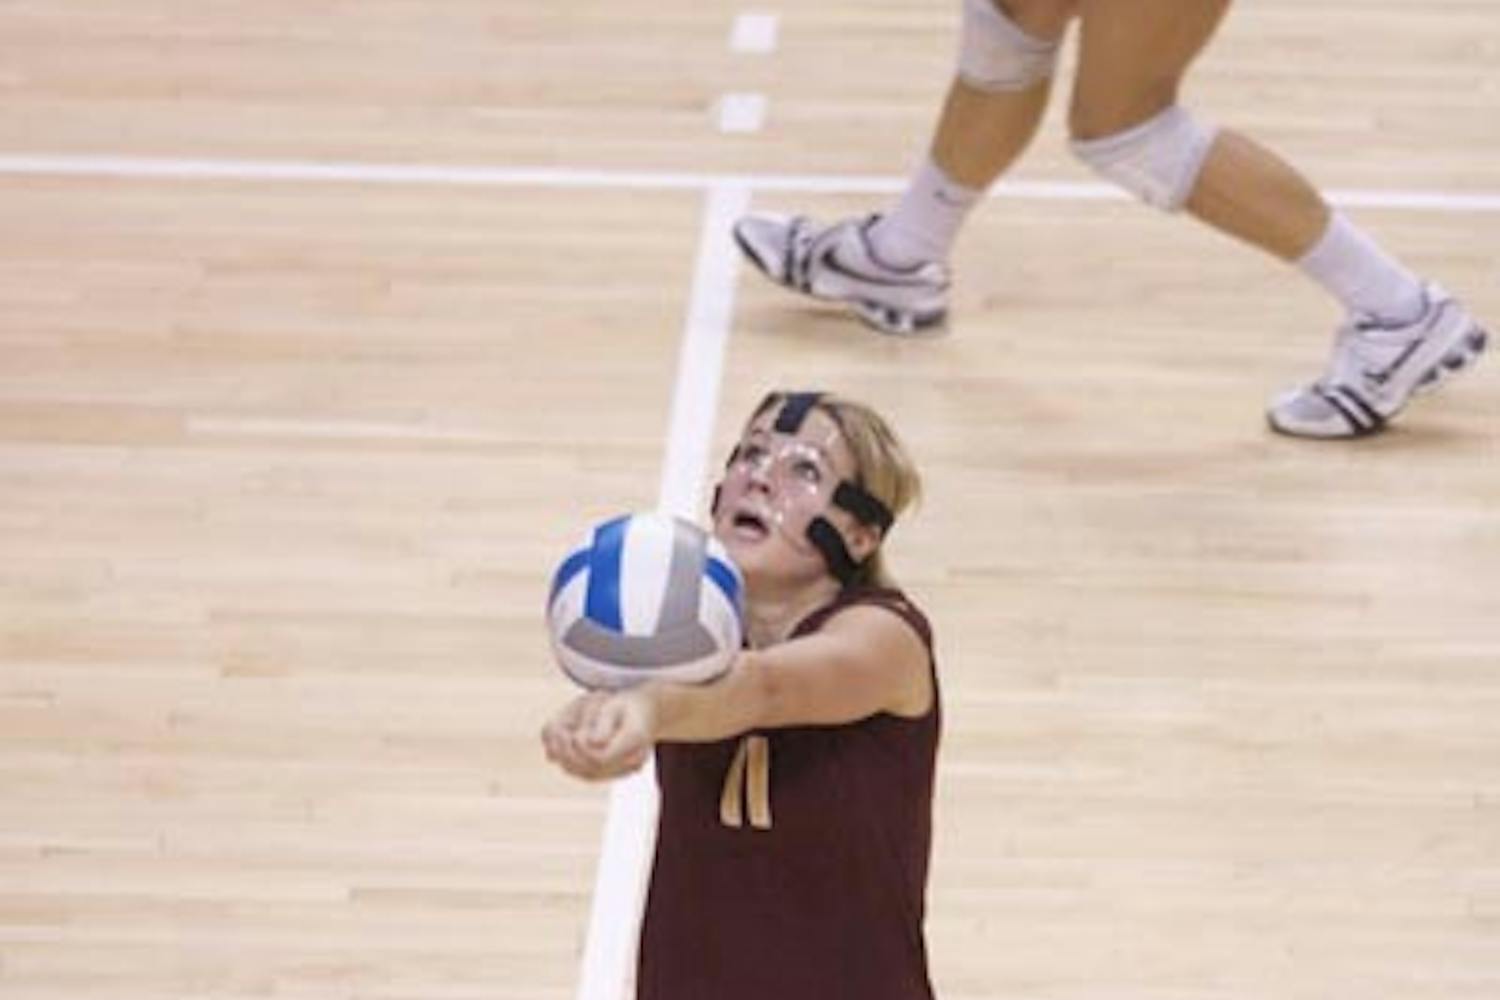 SMOOTH STRIKE: Senior libero Sarah Johnson bumps a volley during a conference match up with California earlier this season. The Sun Devils collected their first Pac-10 win Saturday with a win over Oregon State in five sets. (Photo by Scott Stuk)